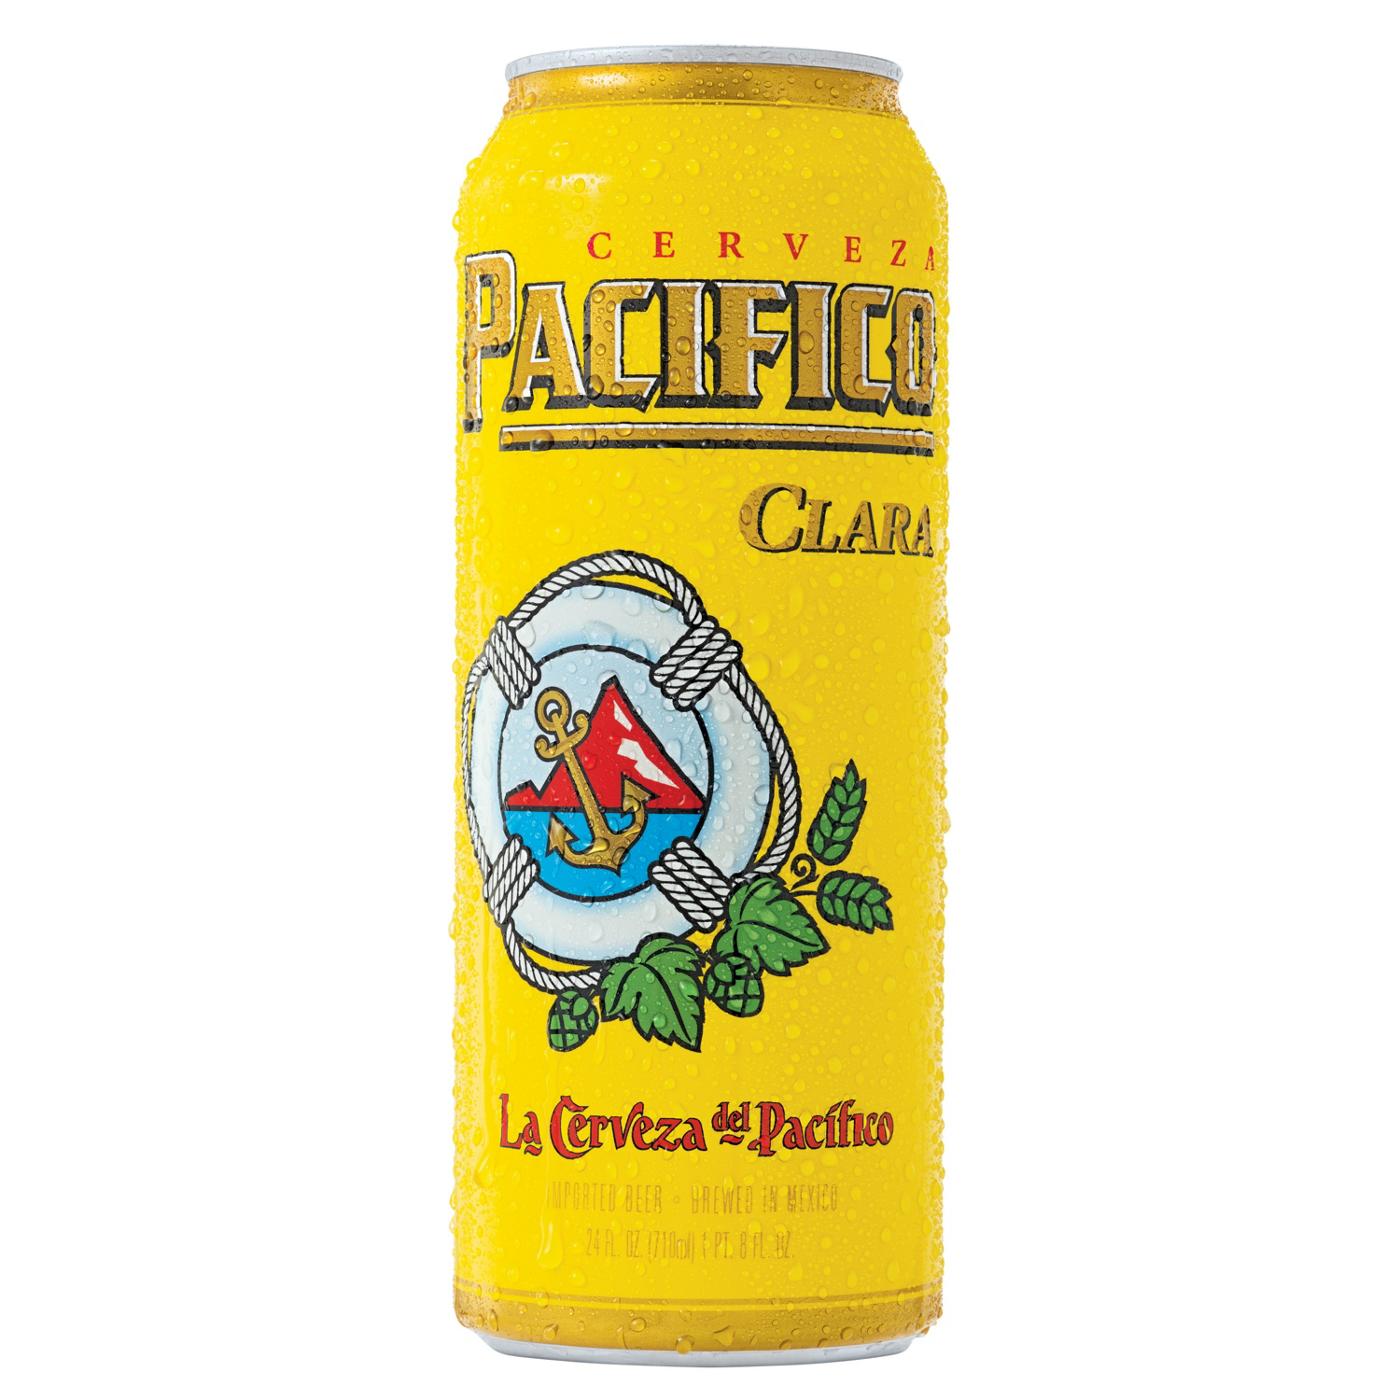 Pacifico Clara Mexican Lager Import Beer 24 oz Can; image 1 of 9